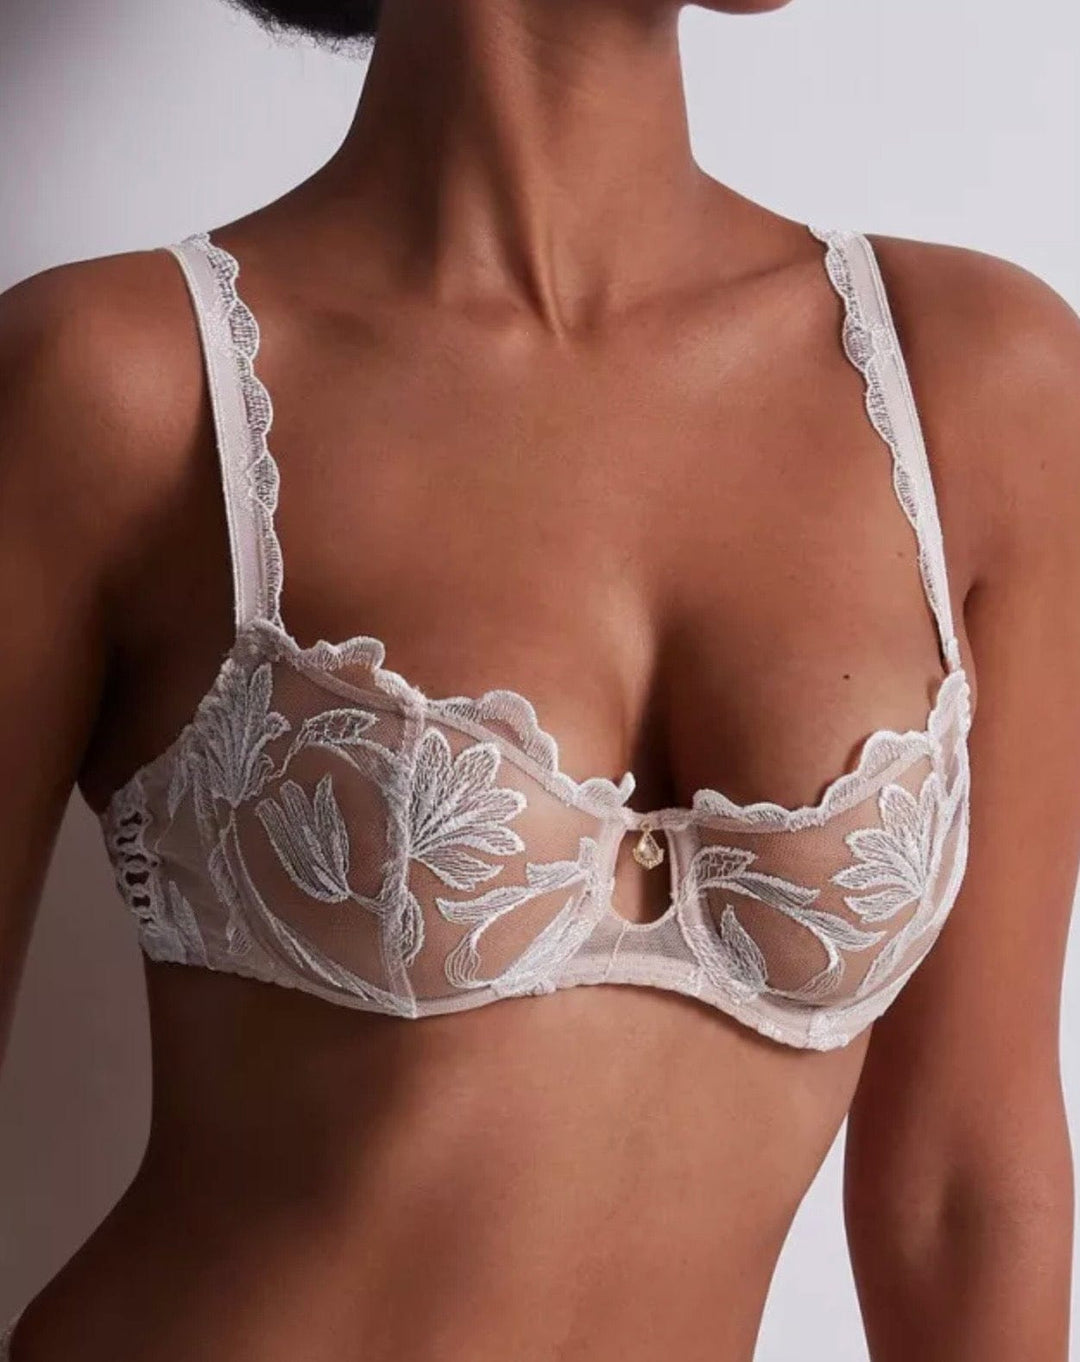 FEATHERED SHELL LUXURY HIGH-END FRENCH BRA - (34B/32C/36A)